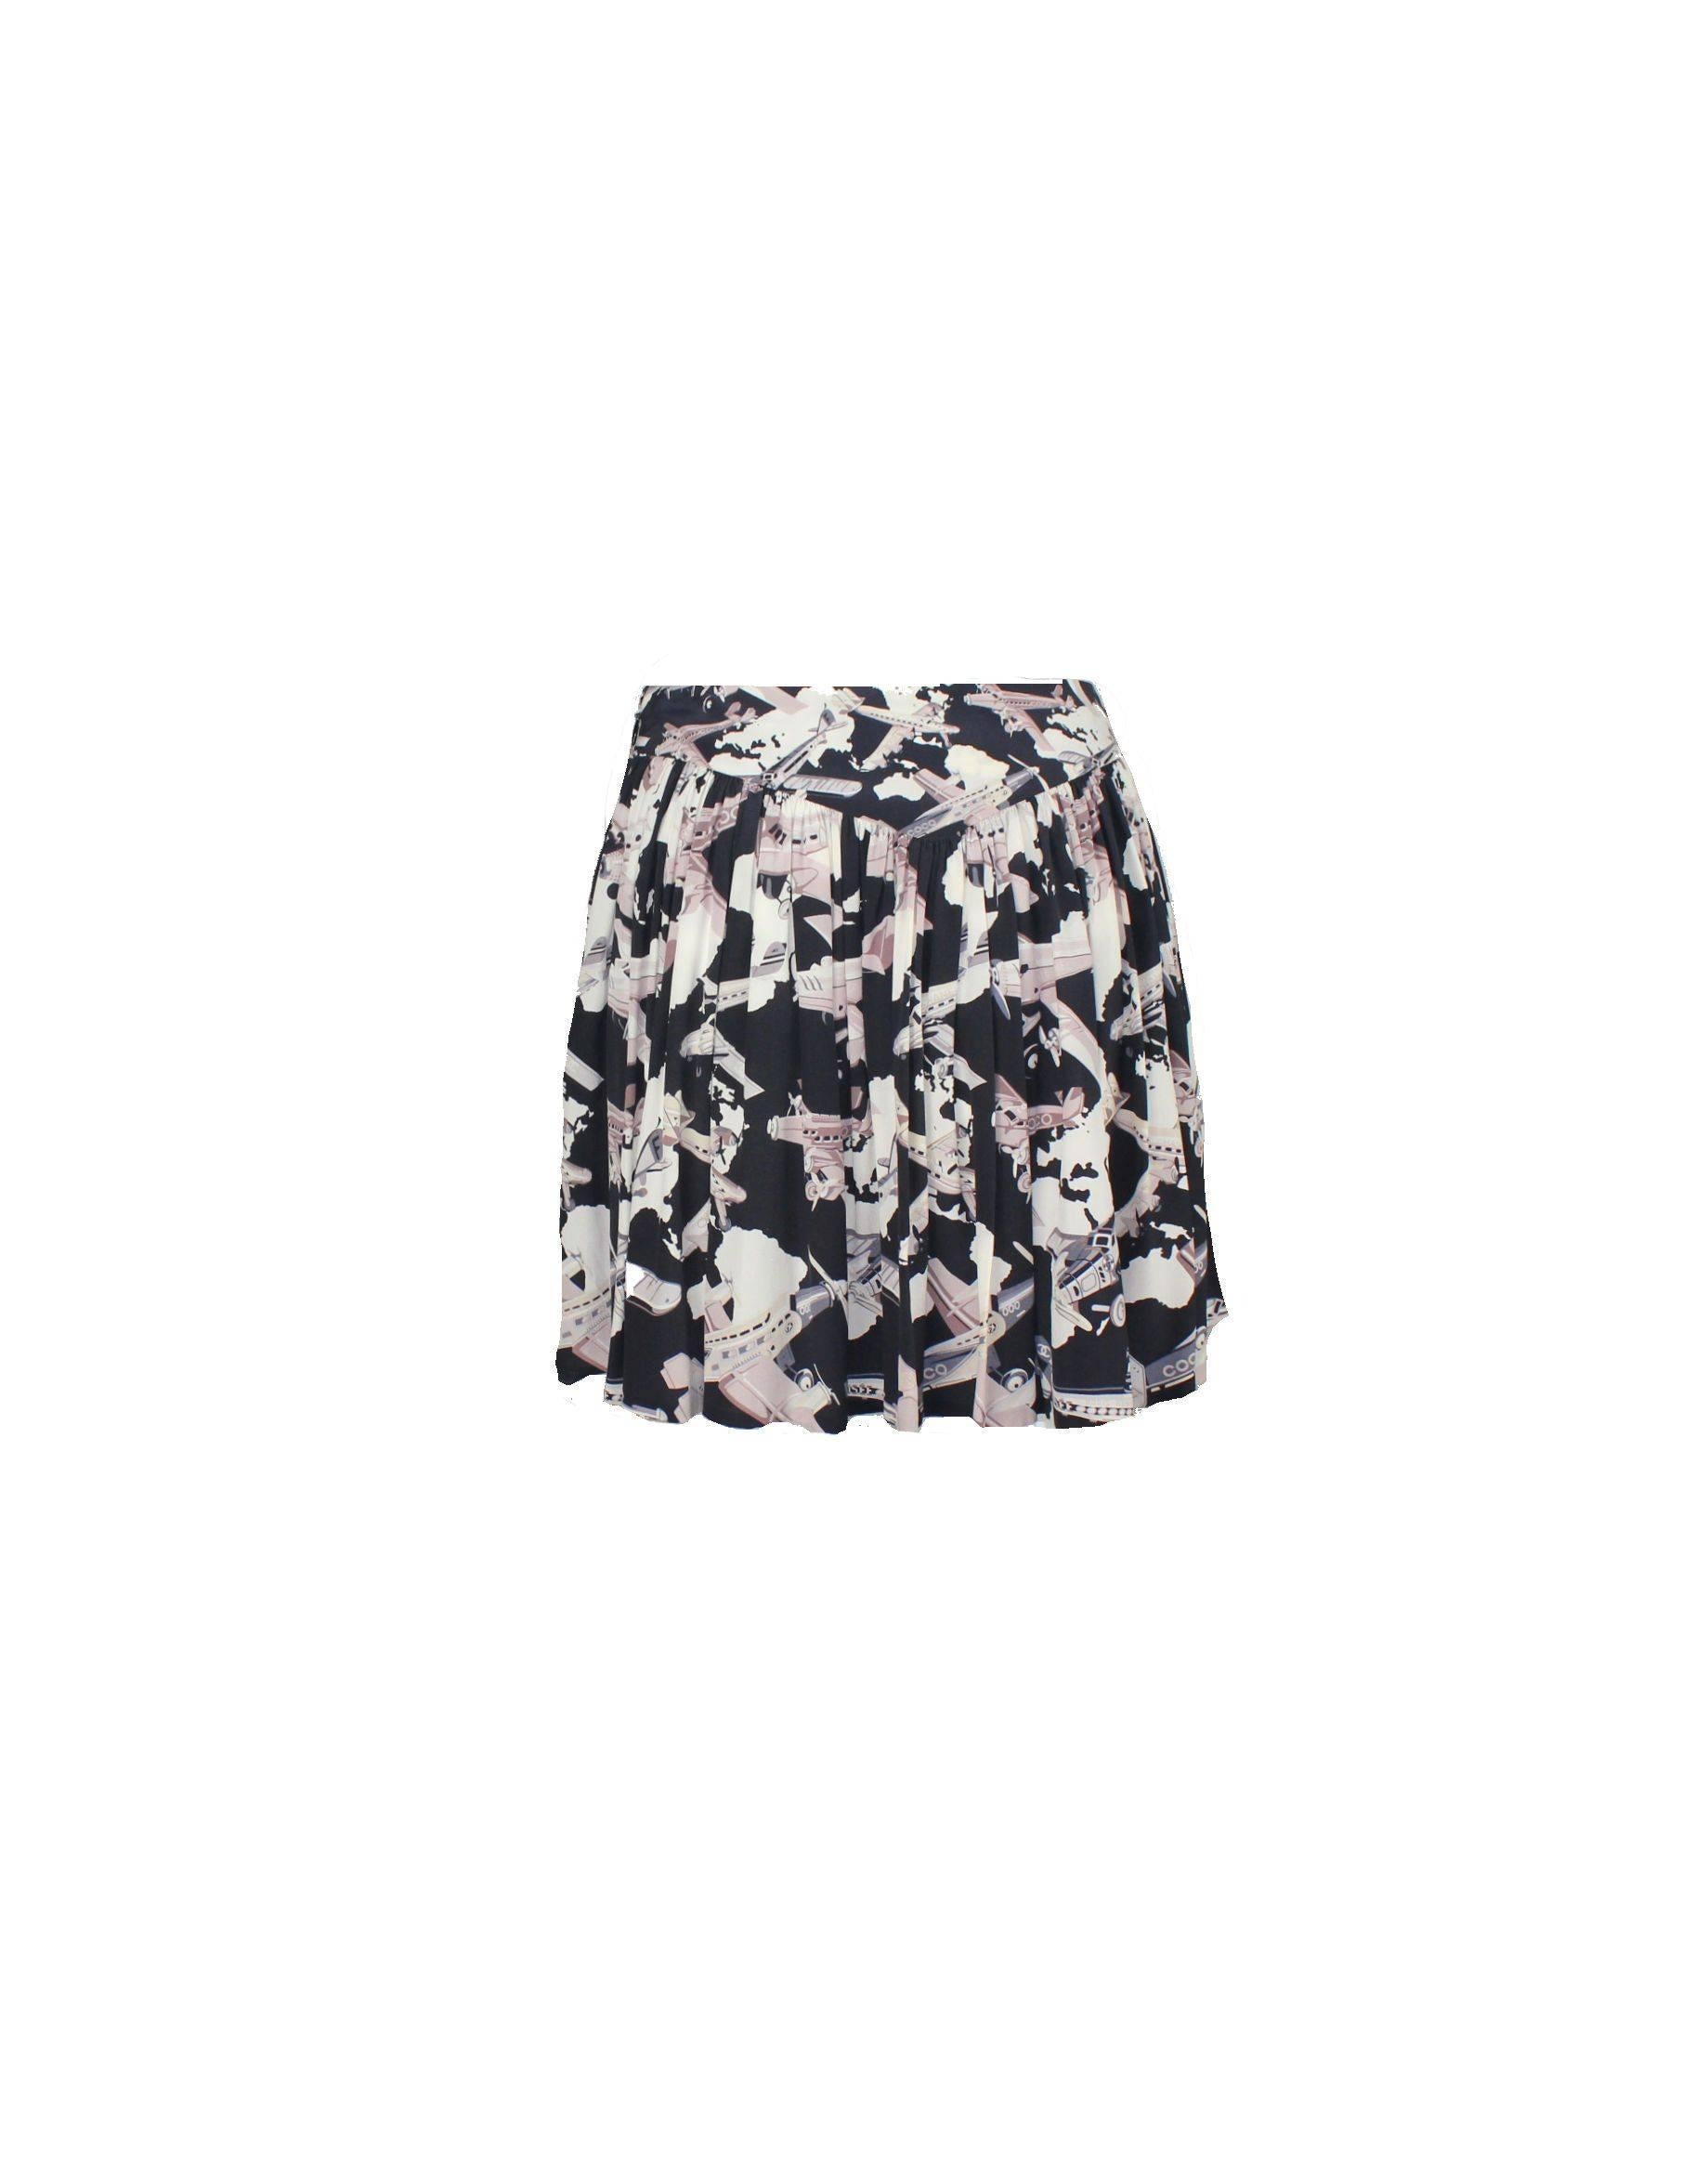 Stunning Chanel skirt
A classic Chanel signature item that never goes out of fashion
Designed by Karl Lagerfeld
Beautiful printed silk 
